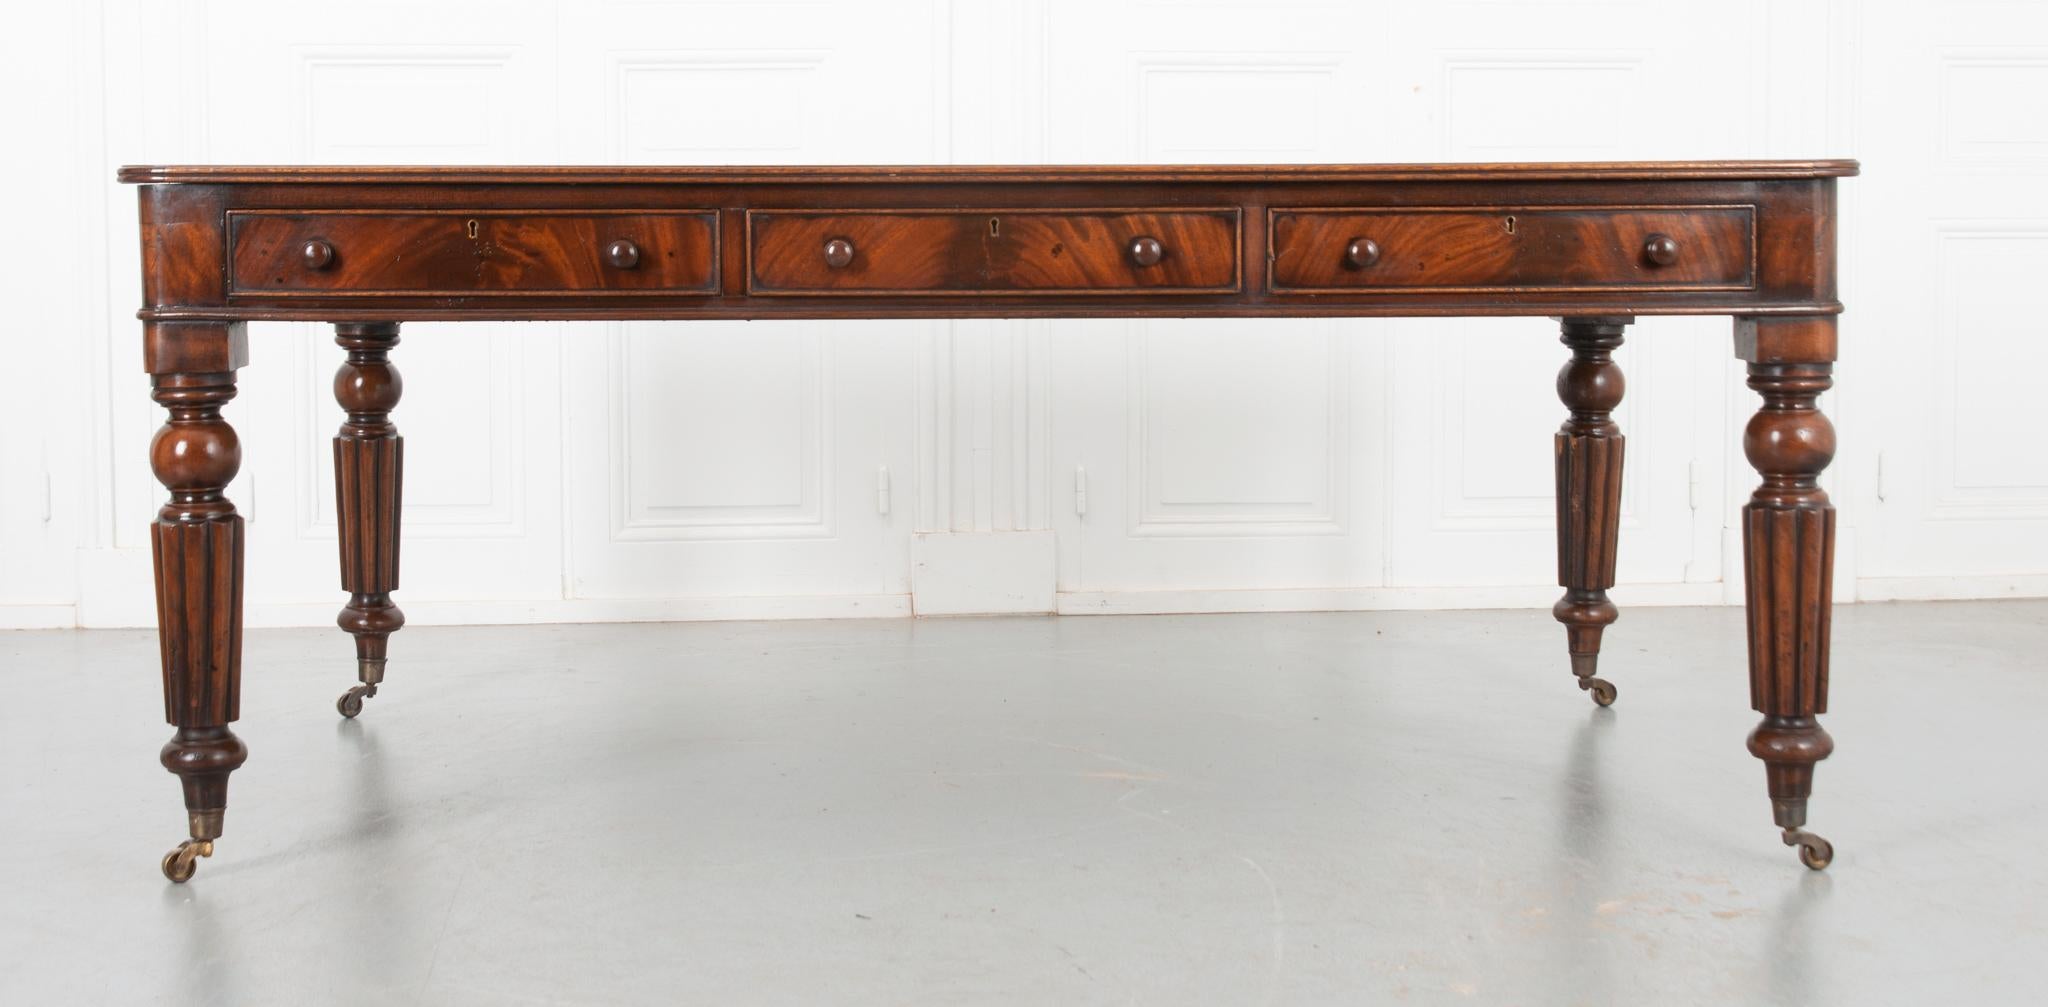 This fine Regency partners desk comes from England, circa 1900. The whole is made of beautiful mahogany with a work surface made of worn green leather. The perimeter of the stunning leather has been imprinted with two rows of decorative leafy